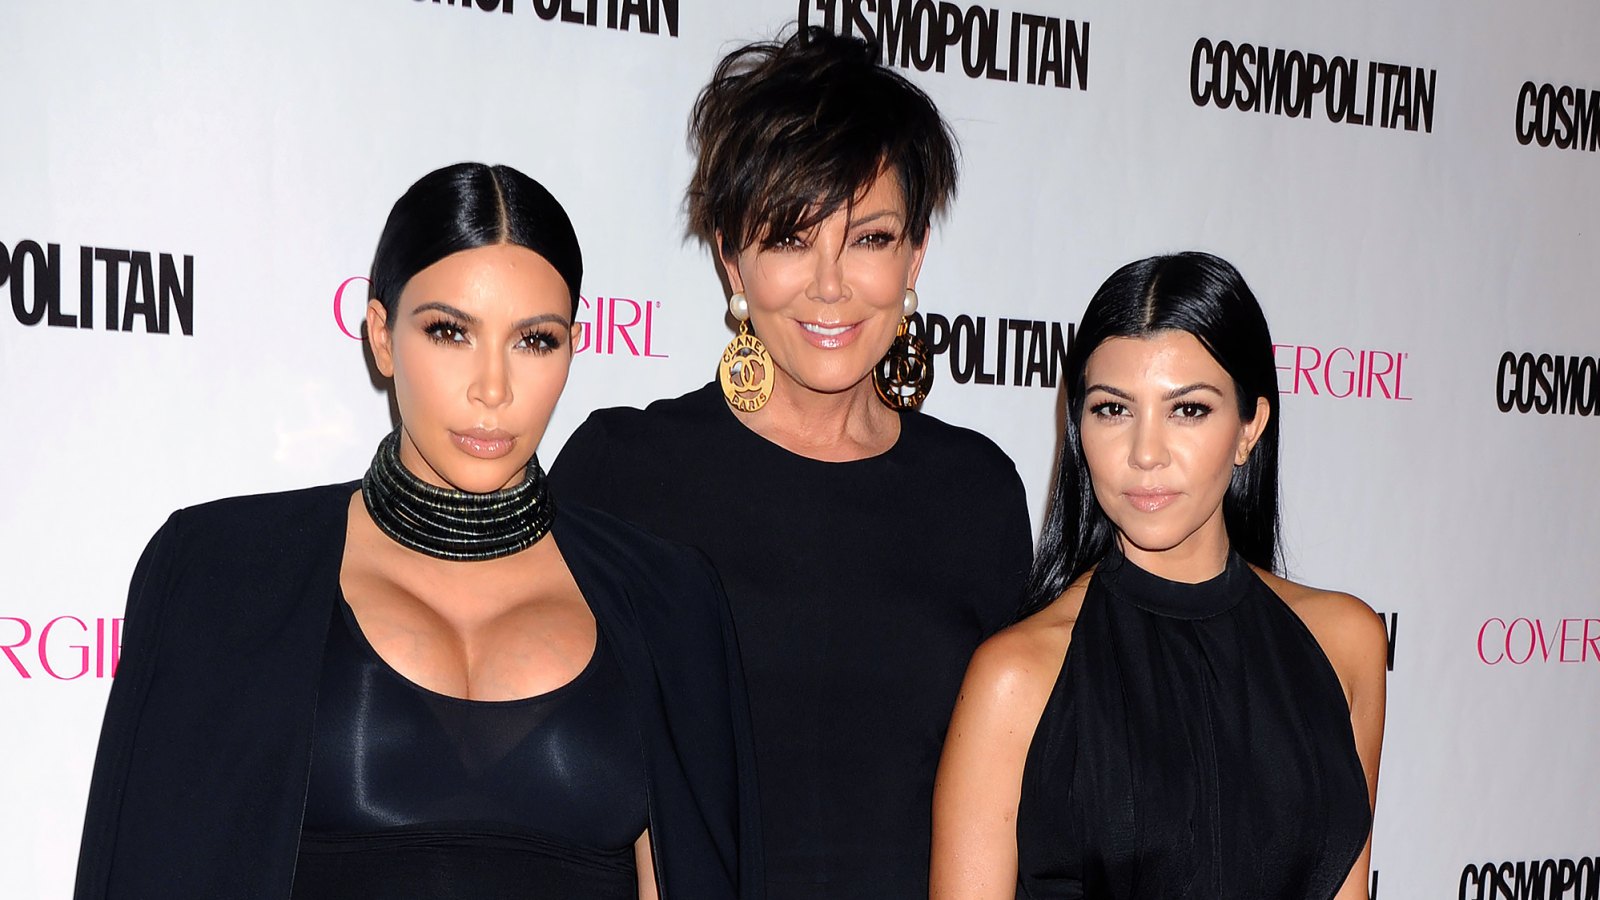 Kris Jenner Jokes She Washed Her Hands a Lot While Baking for Her Kids 3